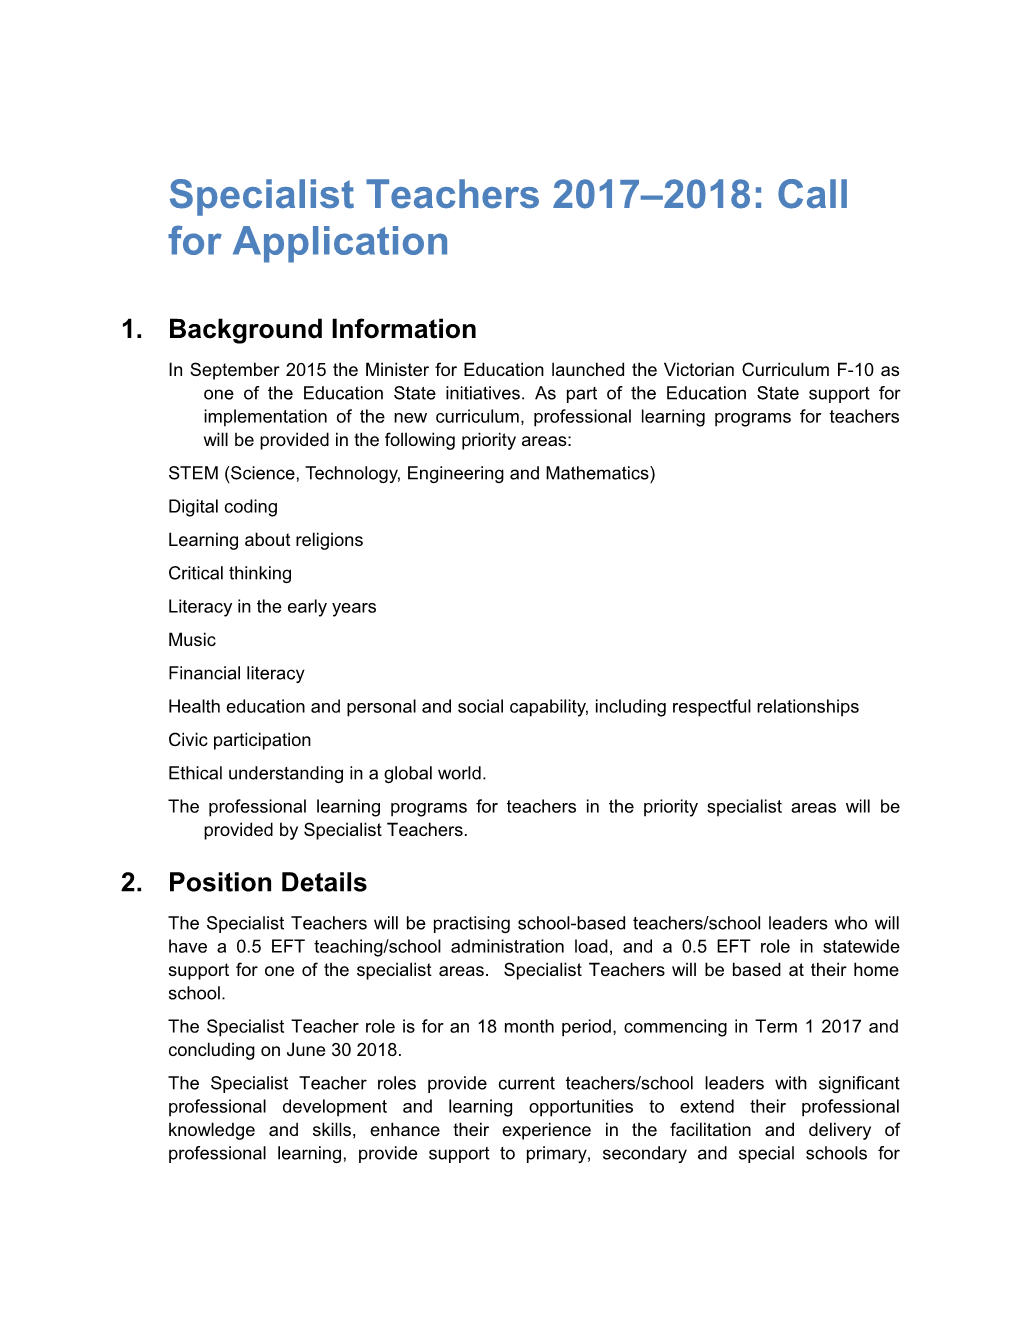 Specialist Teachers 2017 2018: Call for Application